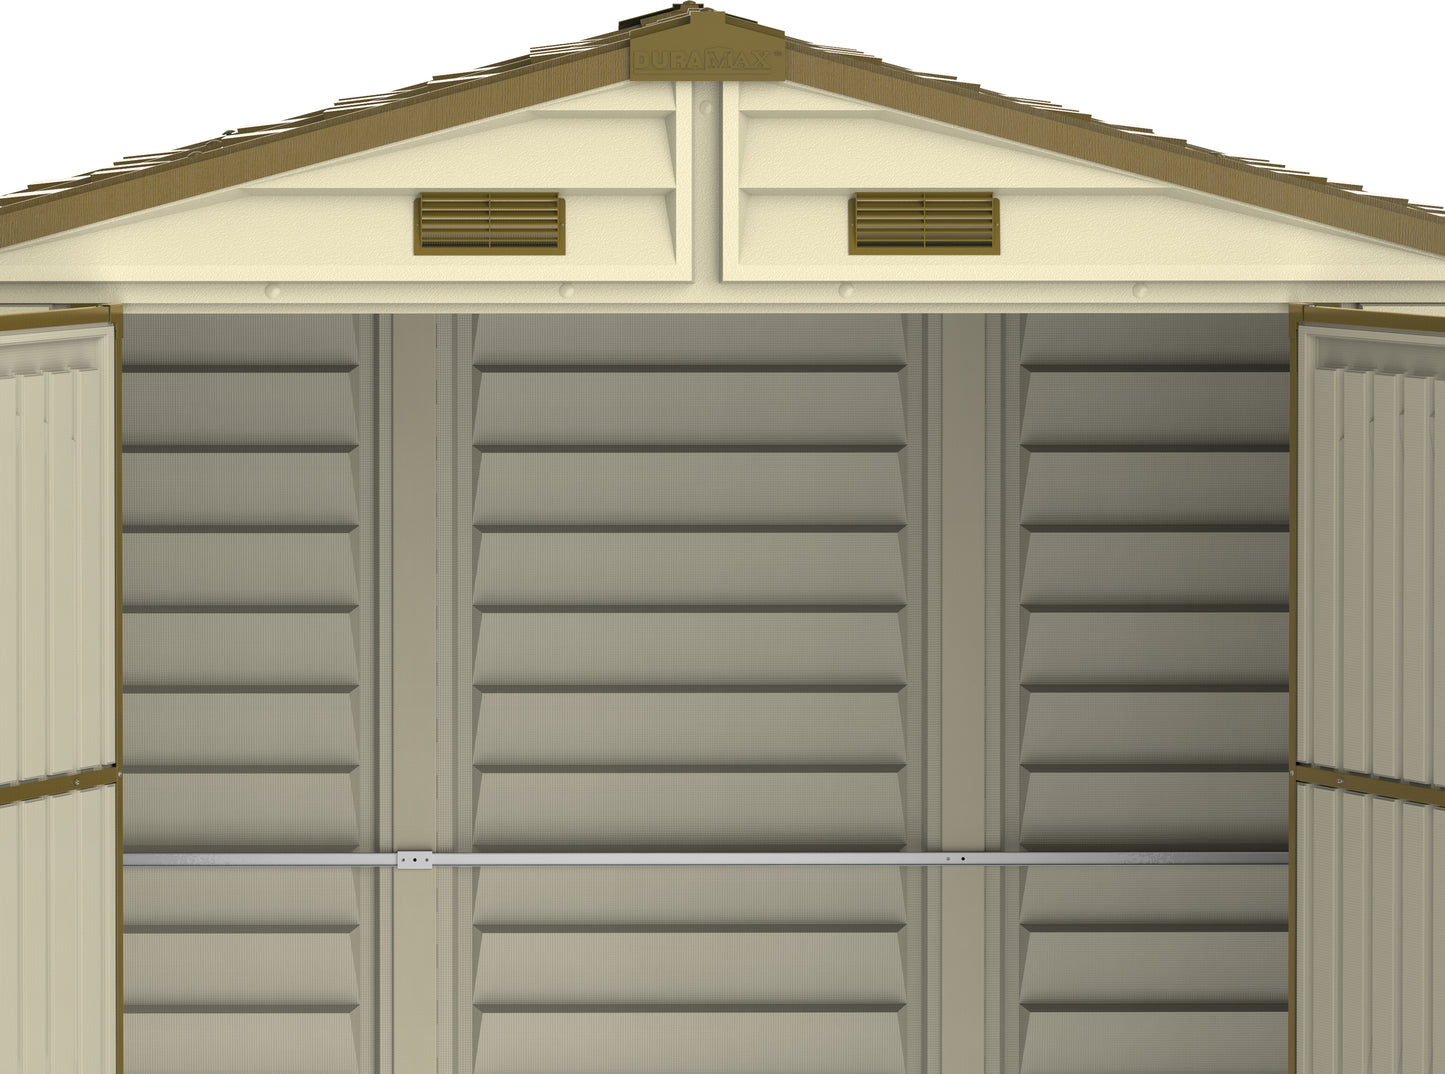 Duramax plastic shed, 2.40 x 1.61 m with double door entry and ventilation.